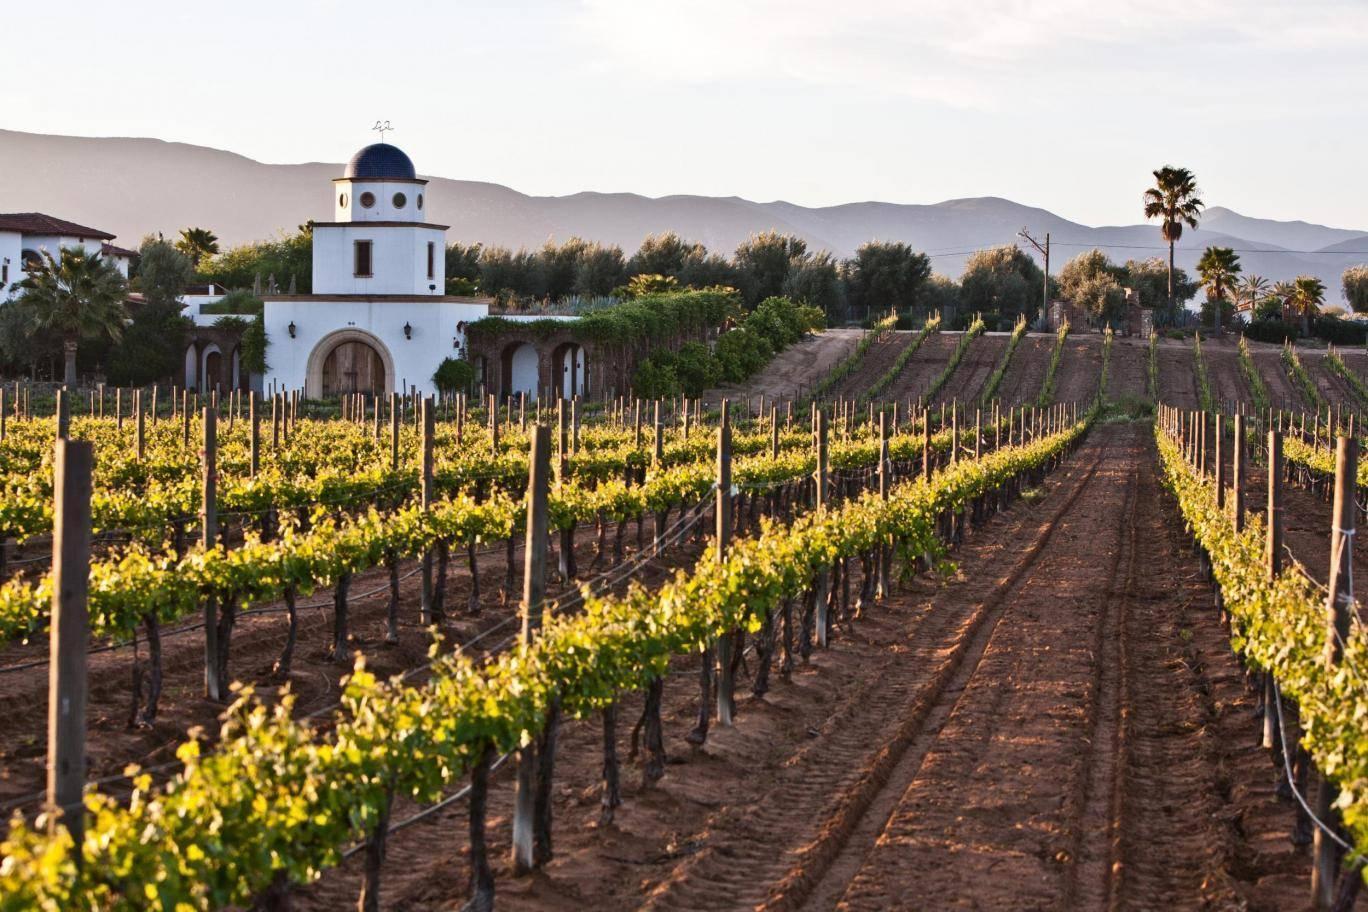 More wines about language: a vineyard in Baja California, Mexico